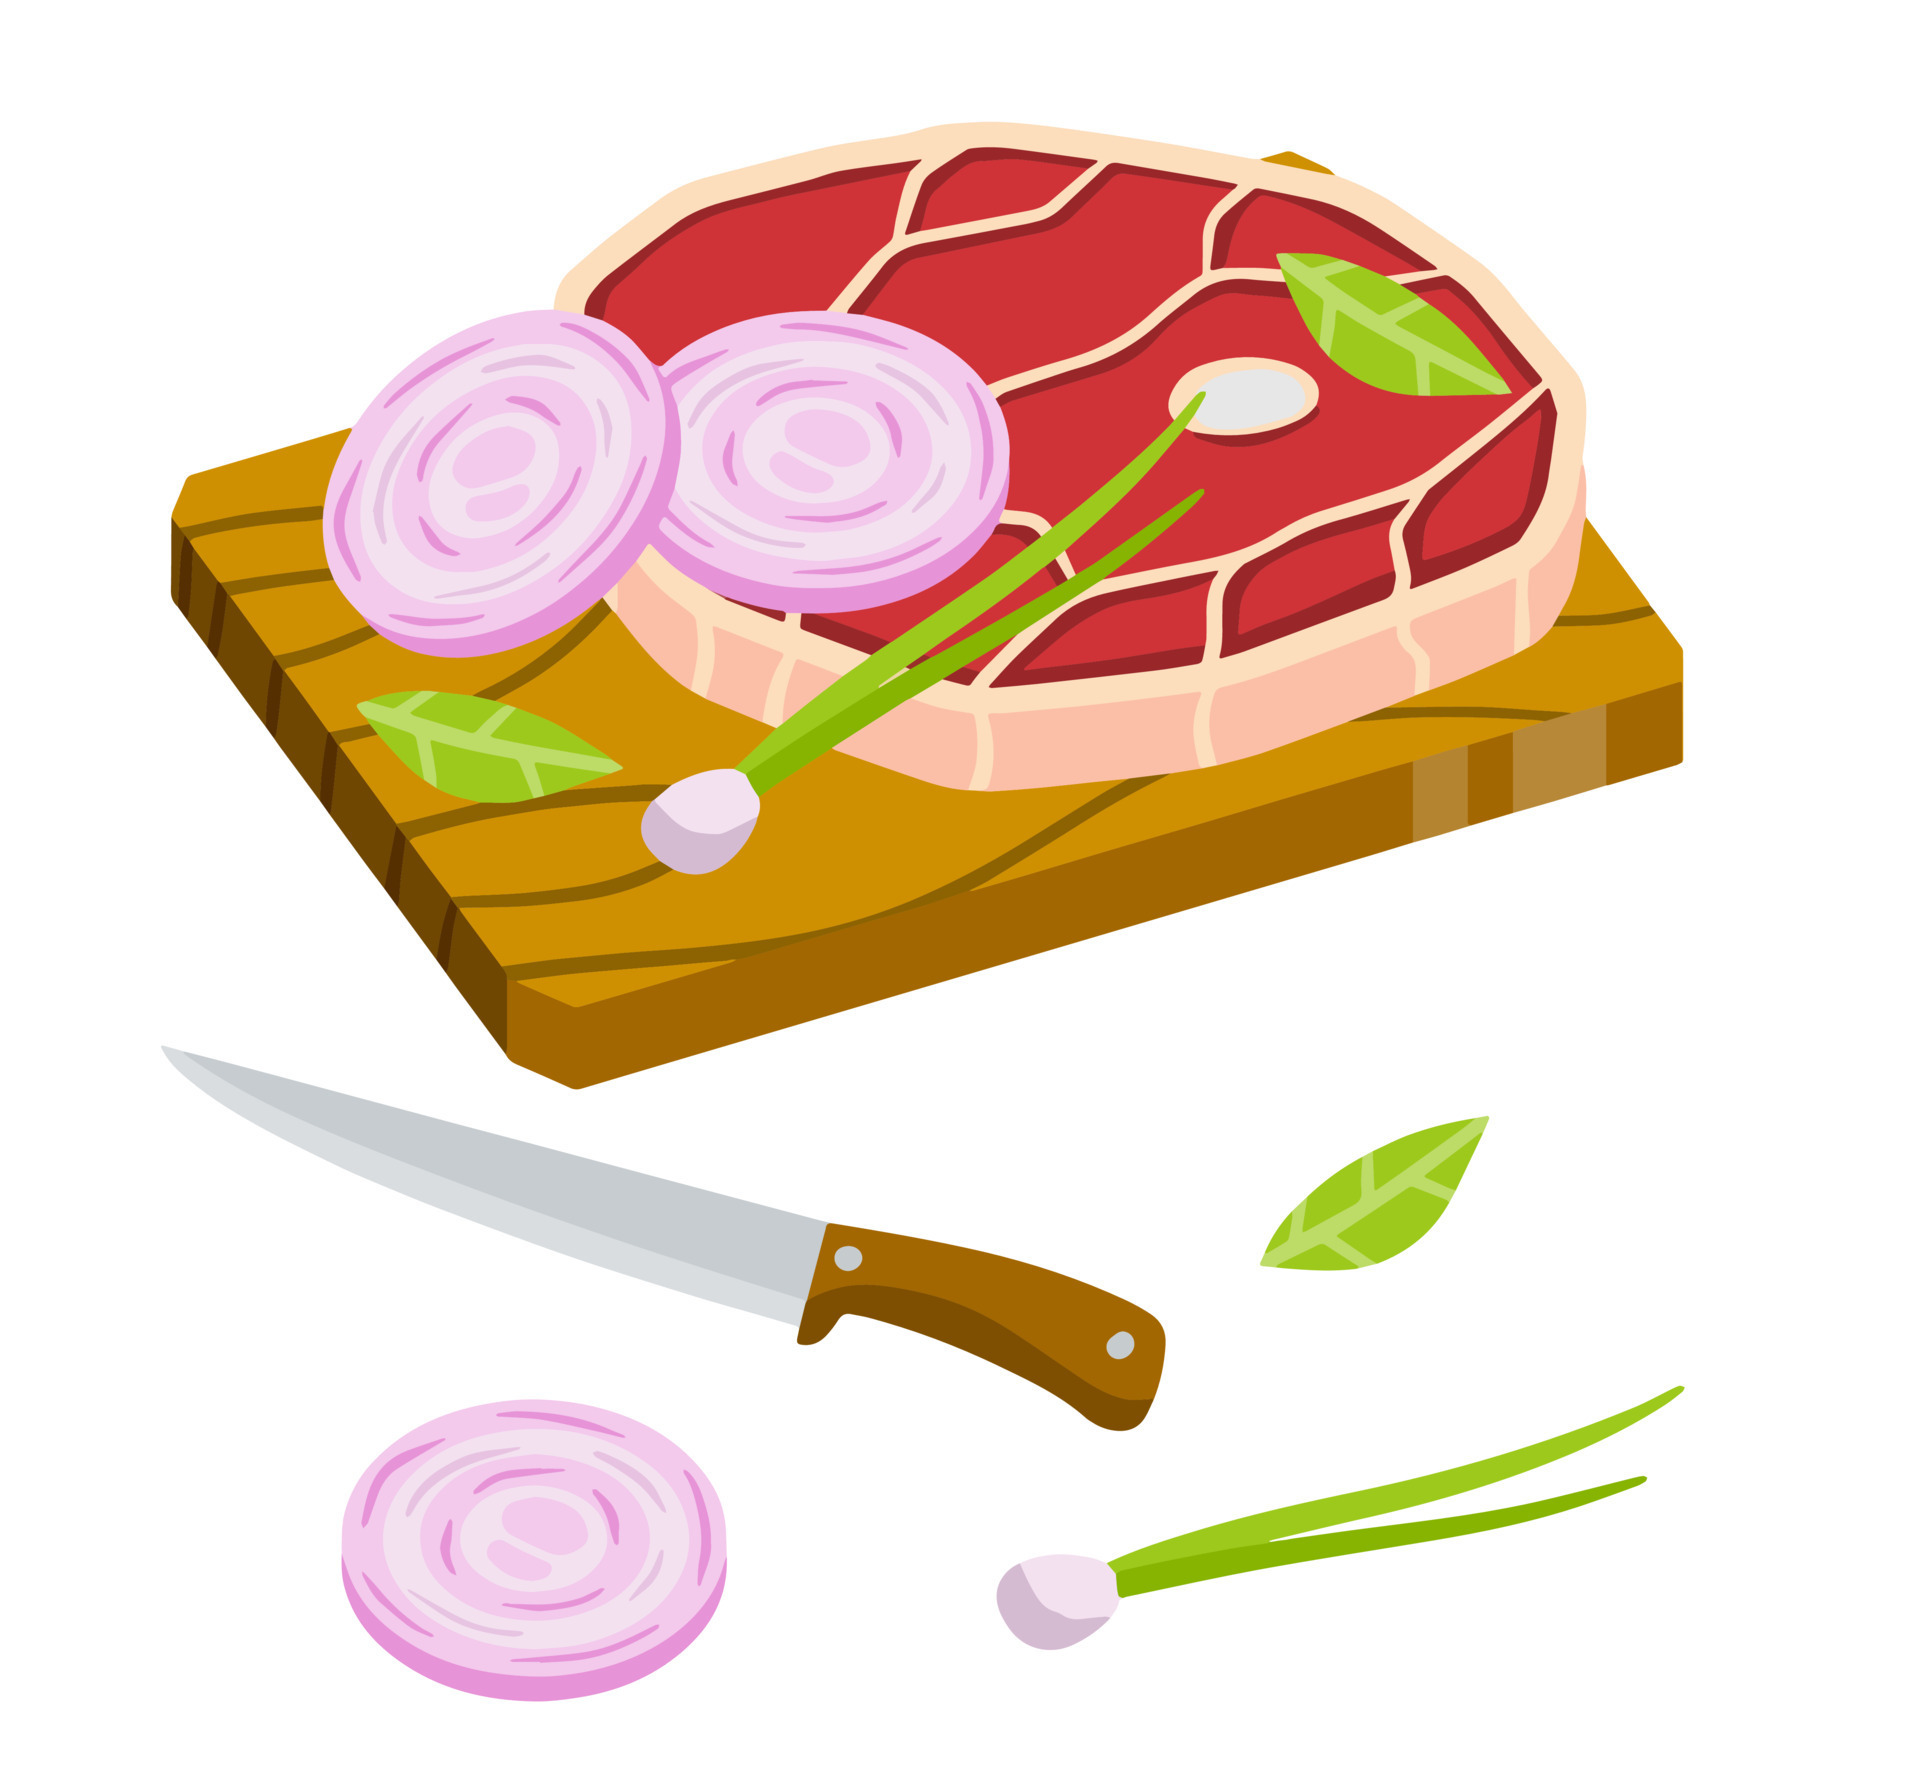 https://static.vecteezy.com/system/resources/previews/018/964/750/original/piece-of-raw-meat-on-chopping-board-chops-and-ingredients-cooking-food-kitchen-and-restaurant-elements-flat-cartoon-illustration-fresh-pork-and-knife-vector.jpg